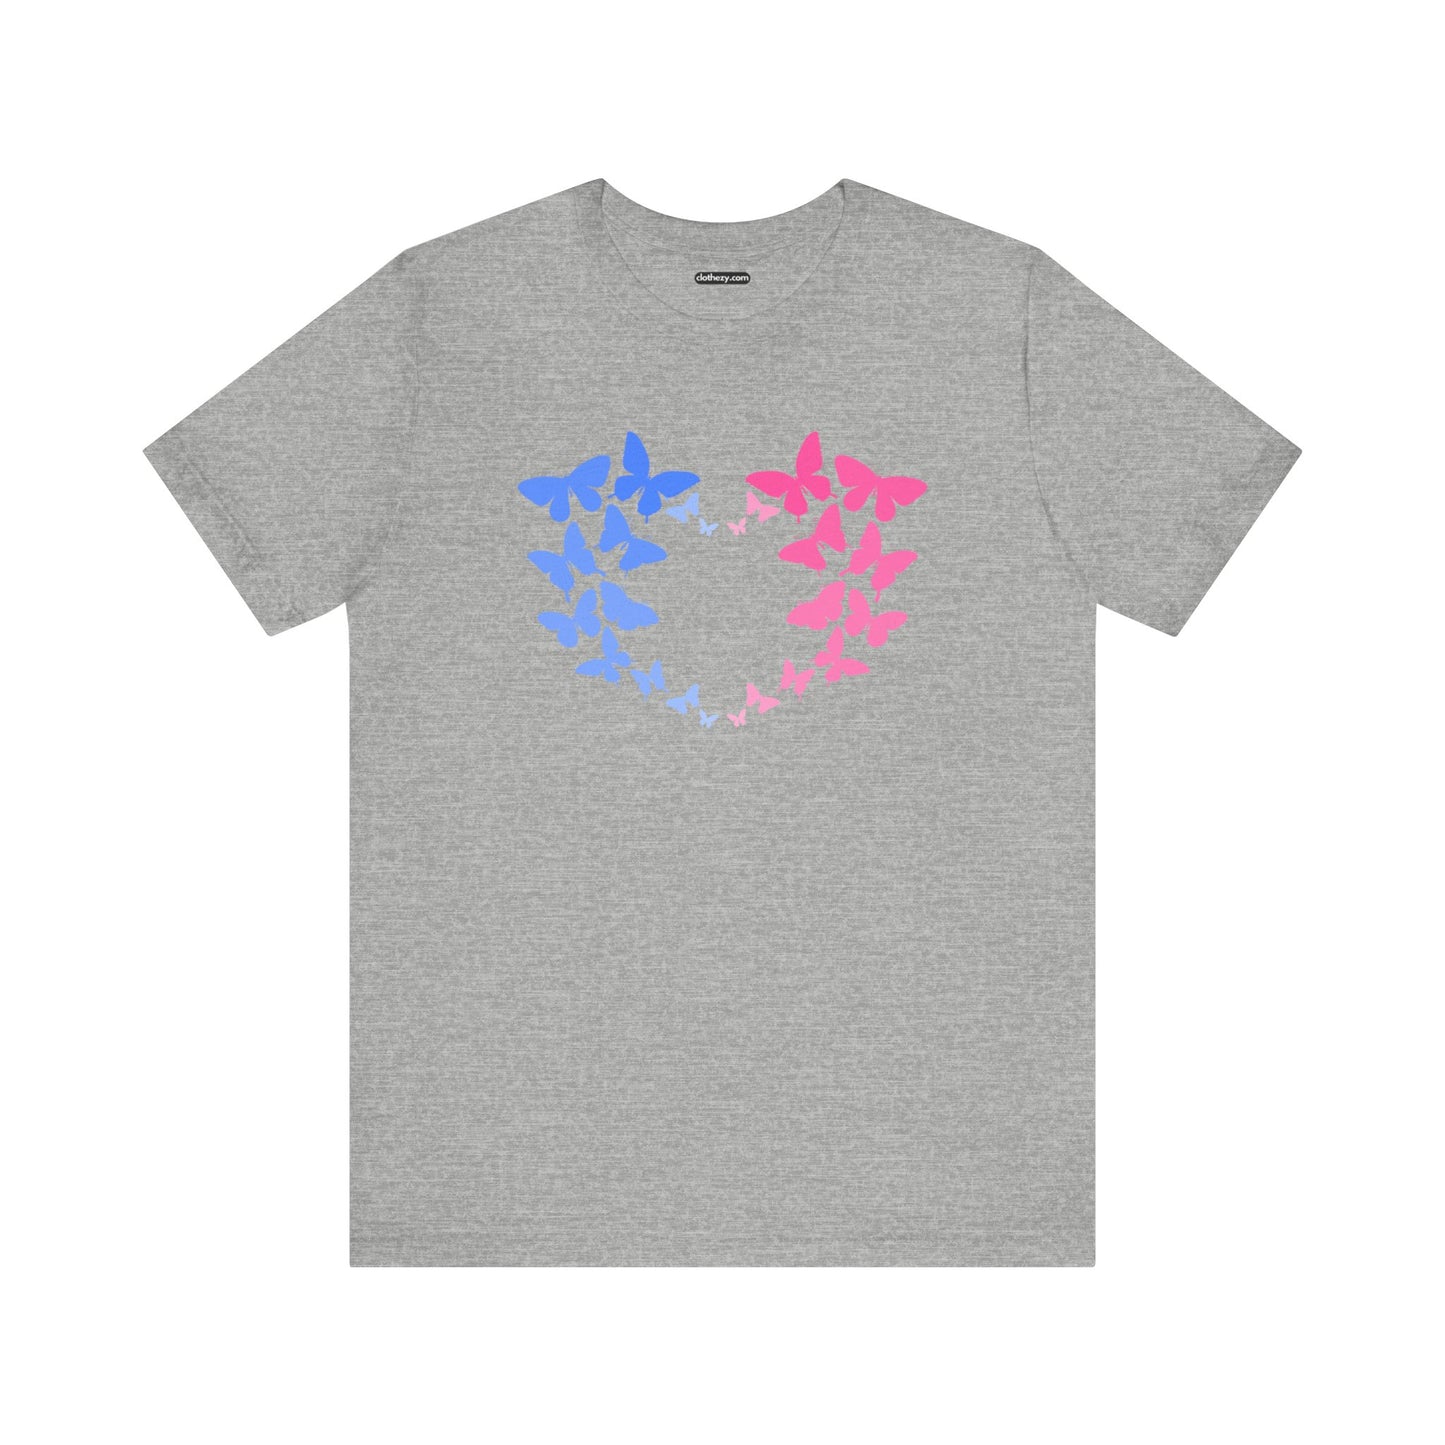 Blue and Pink Butterfly Heart - Soft Cotton Adult Unisex T-Shirt, Gift for friends and family, Gift for friends and family by clothezy.com - Buy Now